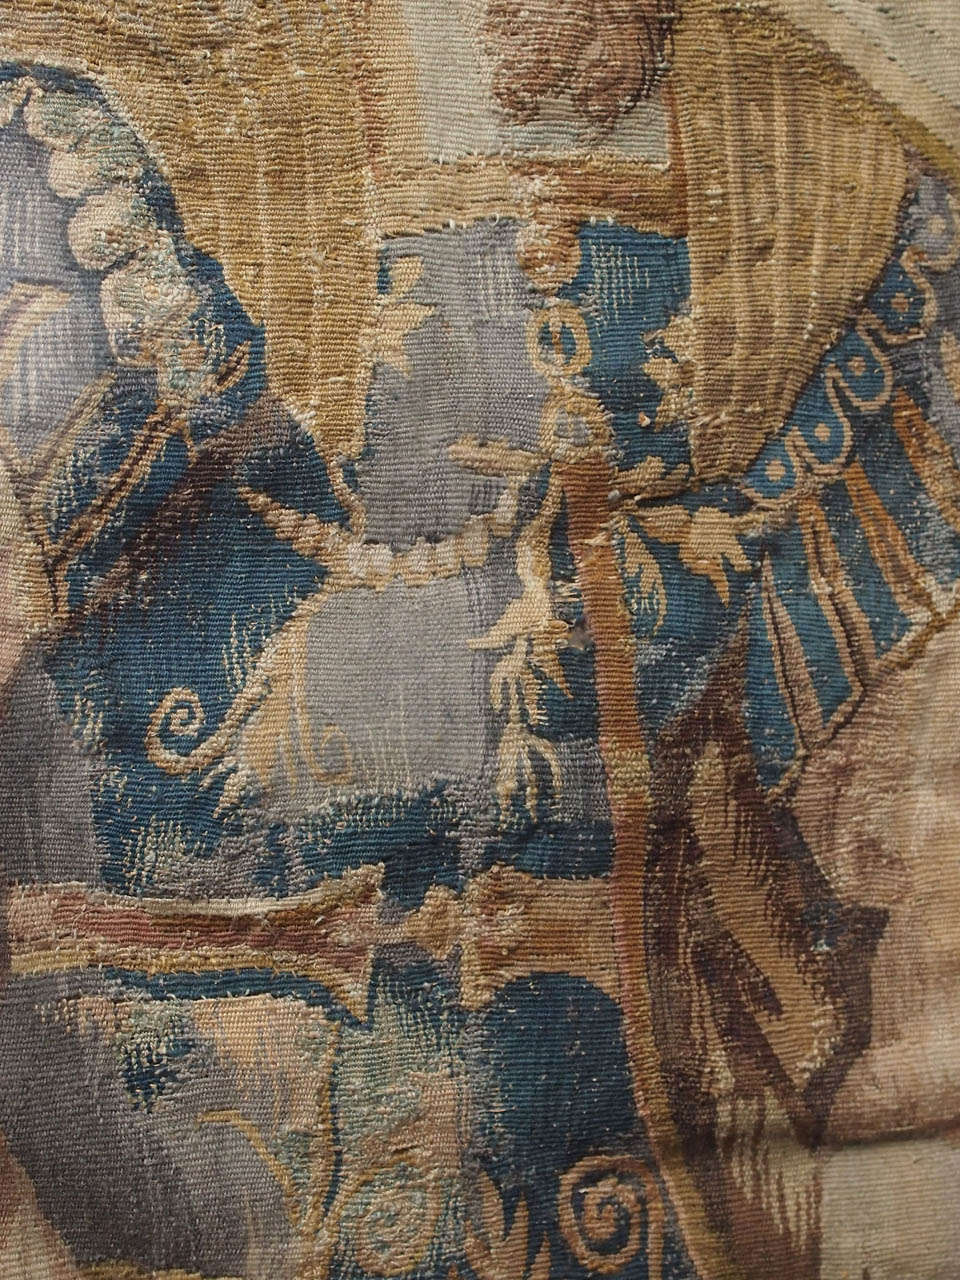 Wool 17th C. Flemish Tapestry Fragment in 19th Century Frame